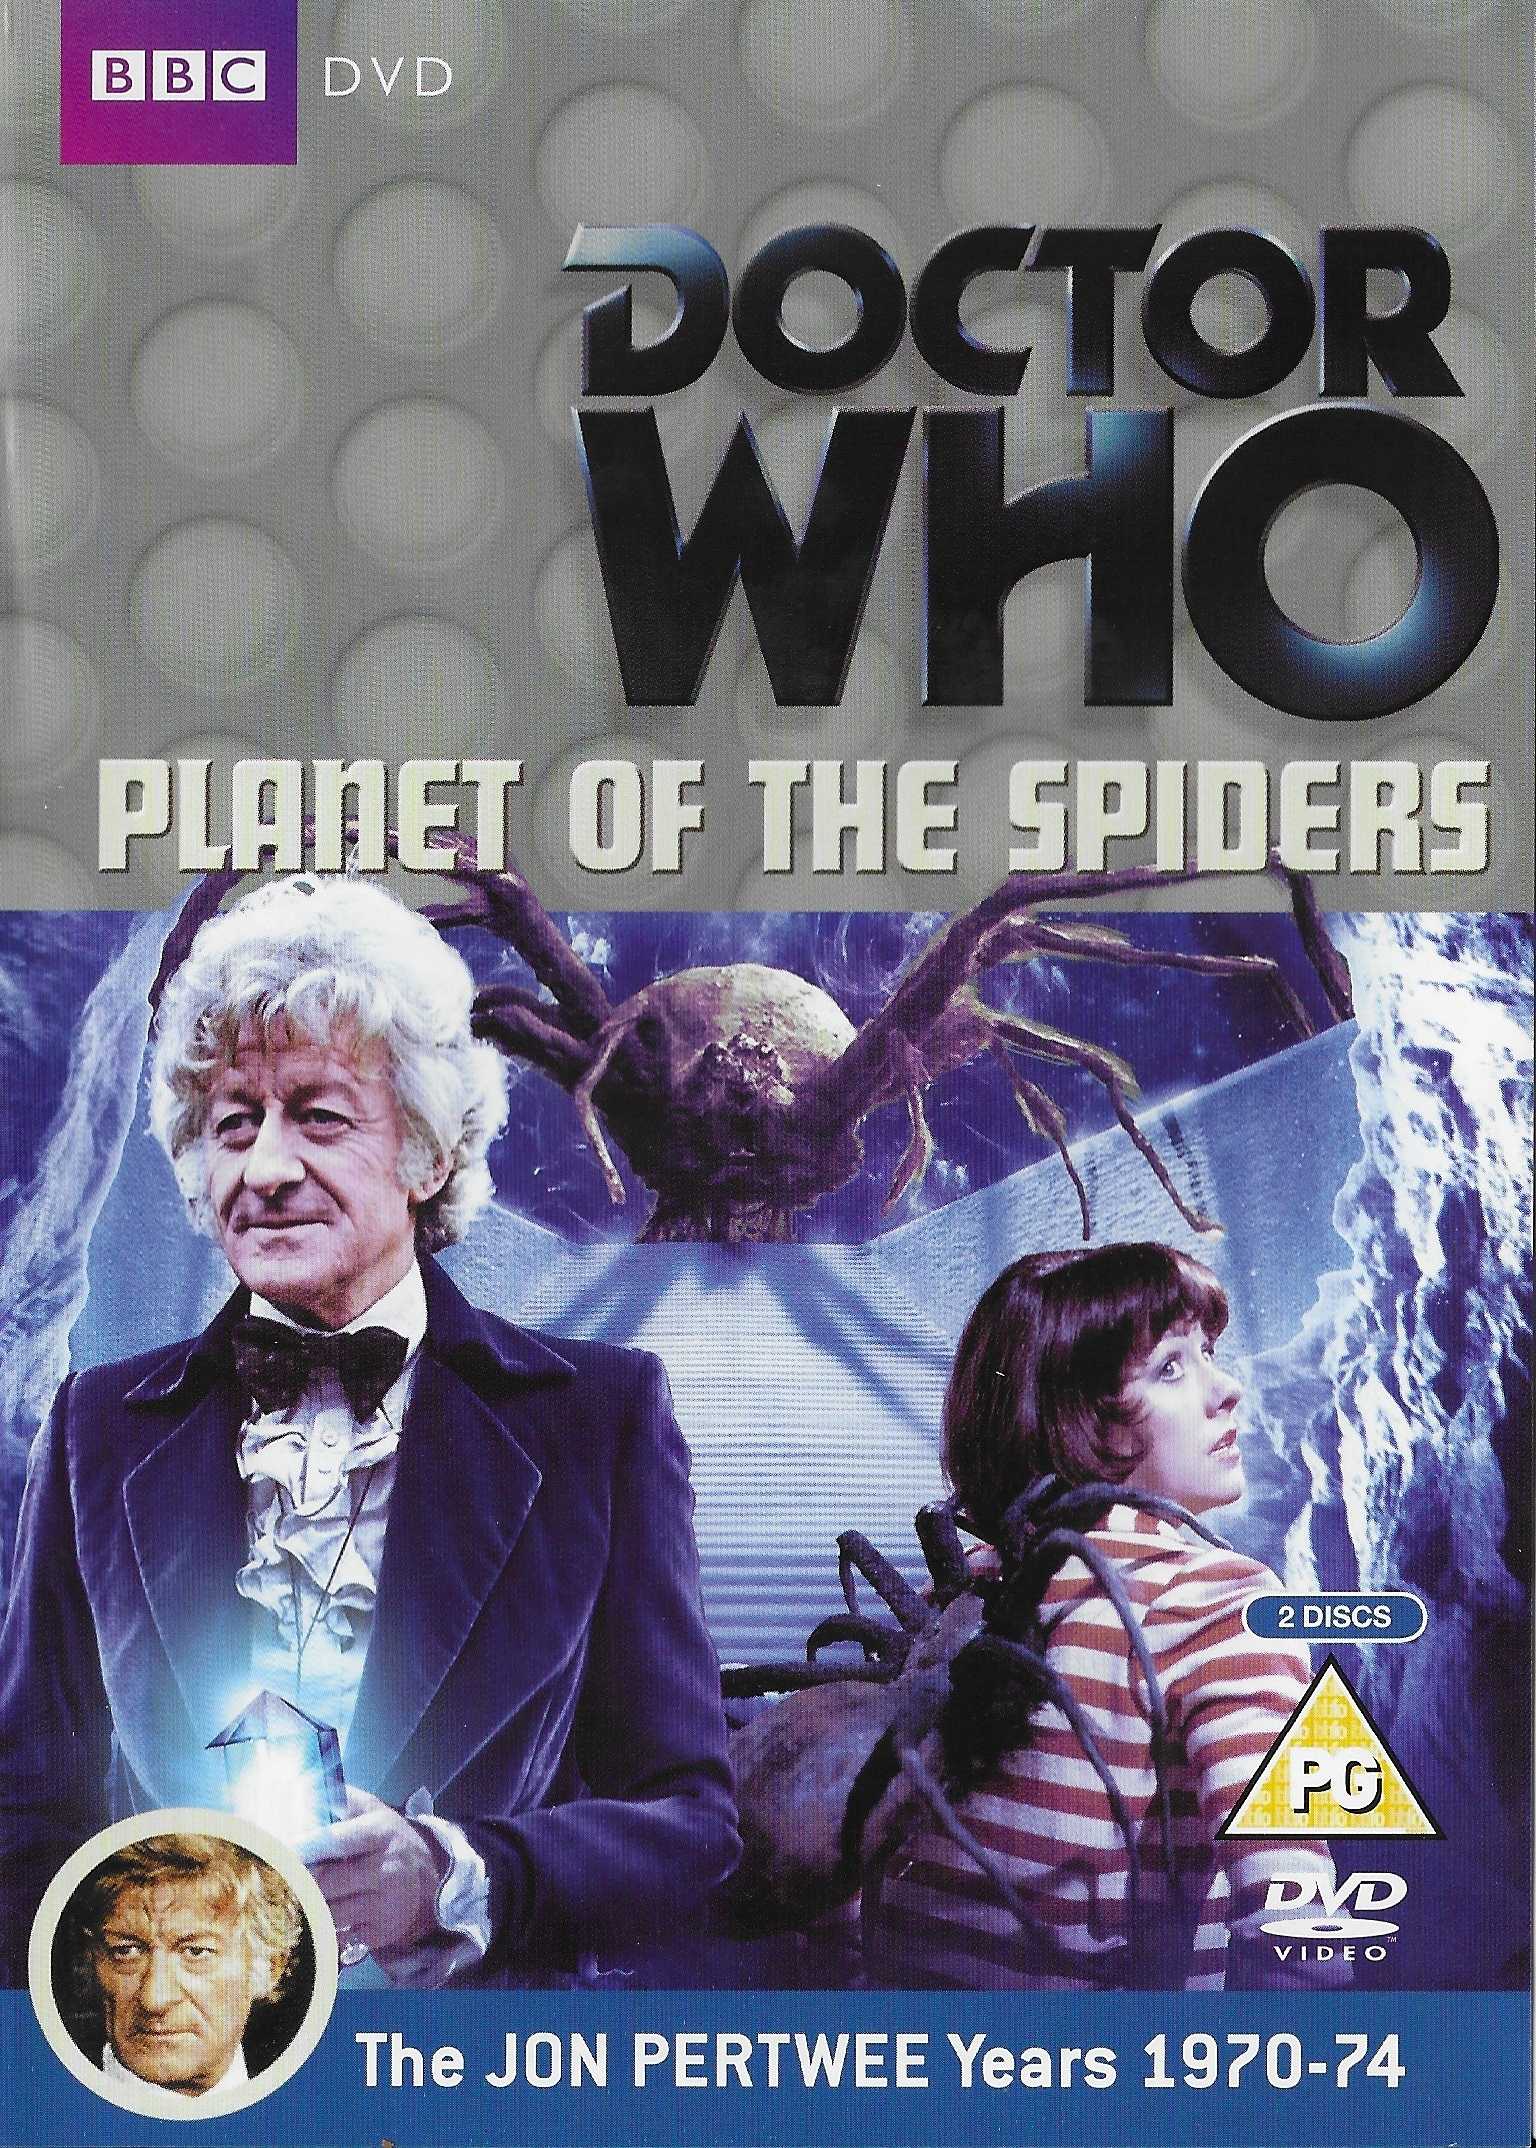 Picture of BBCDVD 1809 Doctor Who - Planet of the spiders by artist Robert Sloman from the BBC dvds - Records and Tapes library